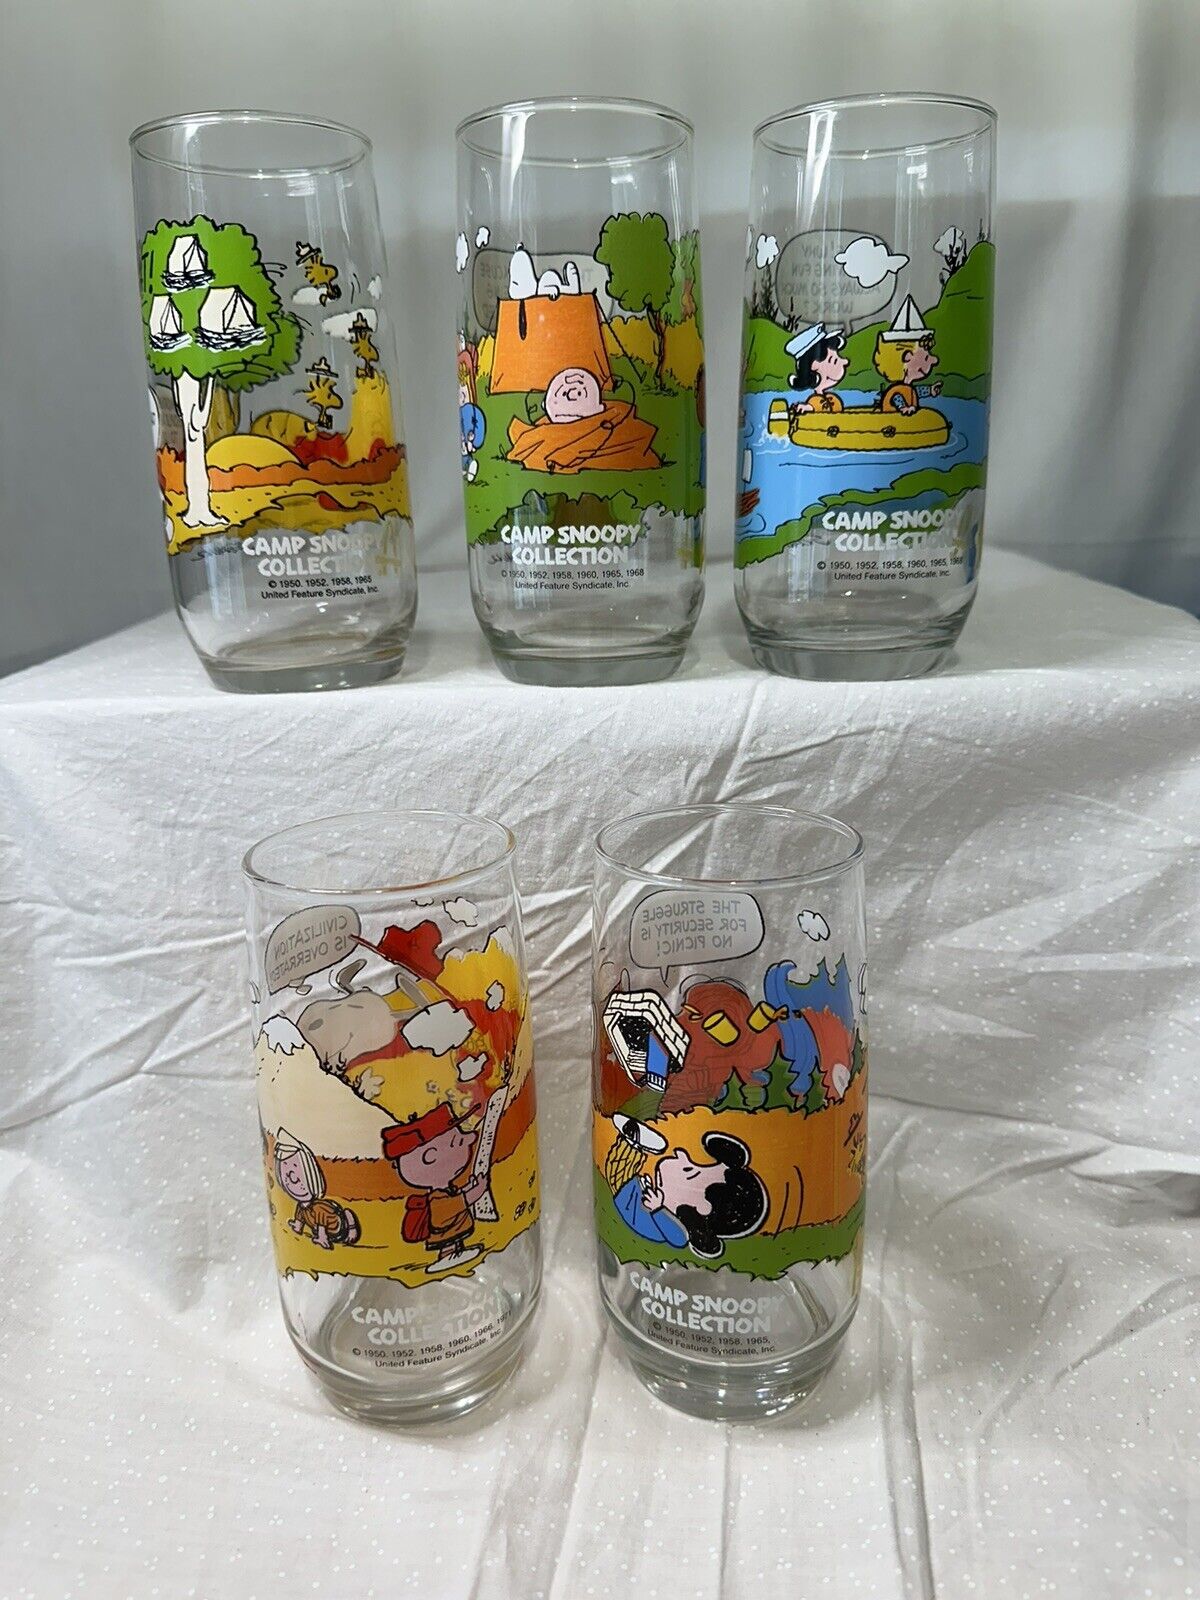 Vintage McDonald's Peanuts Camp Snoopy Collection Glasses Complete Set of 5 Nice